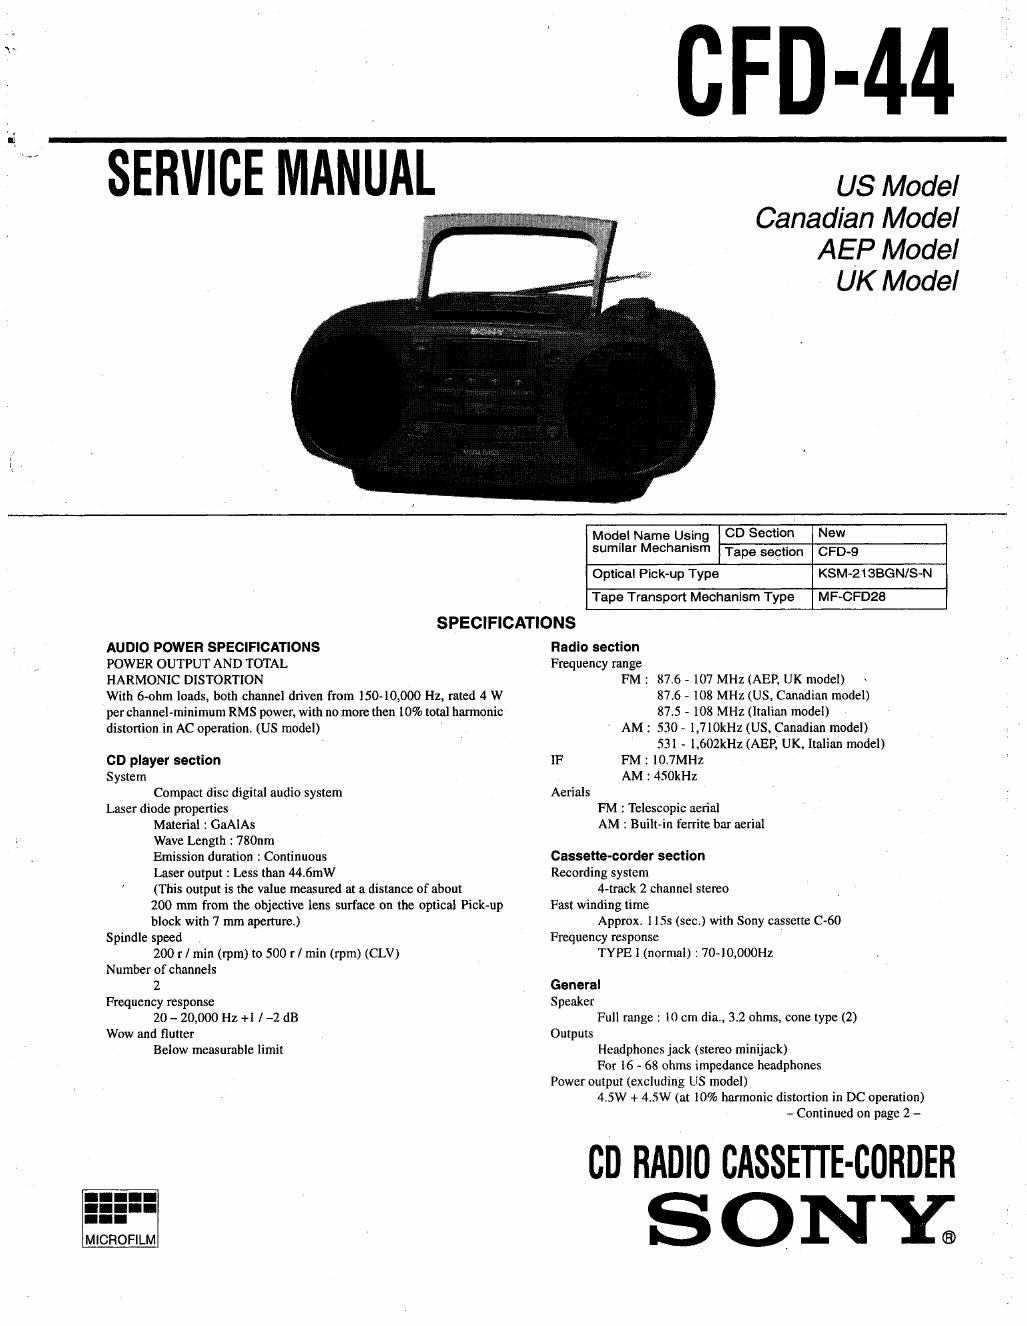 sony cfd 44 service manual